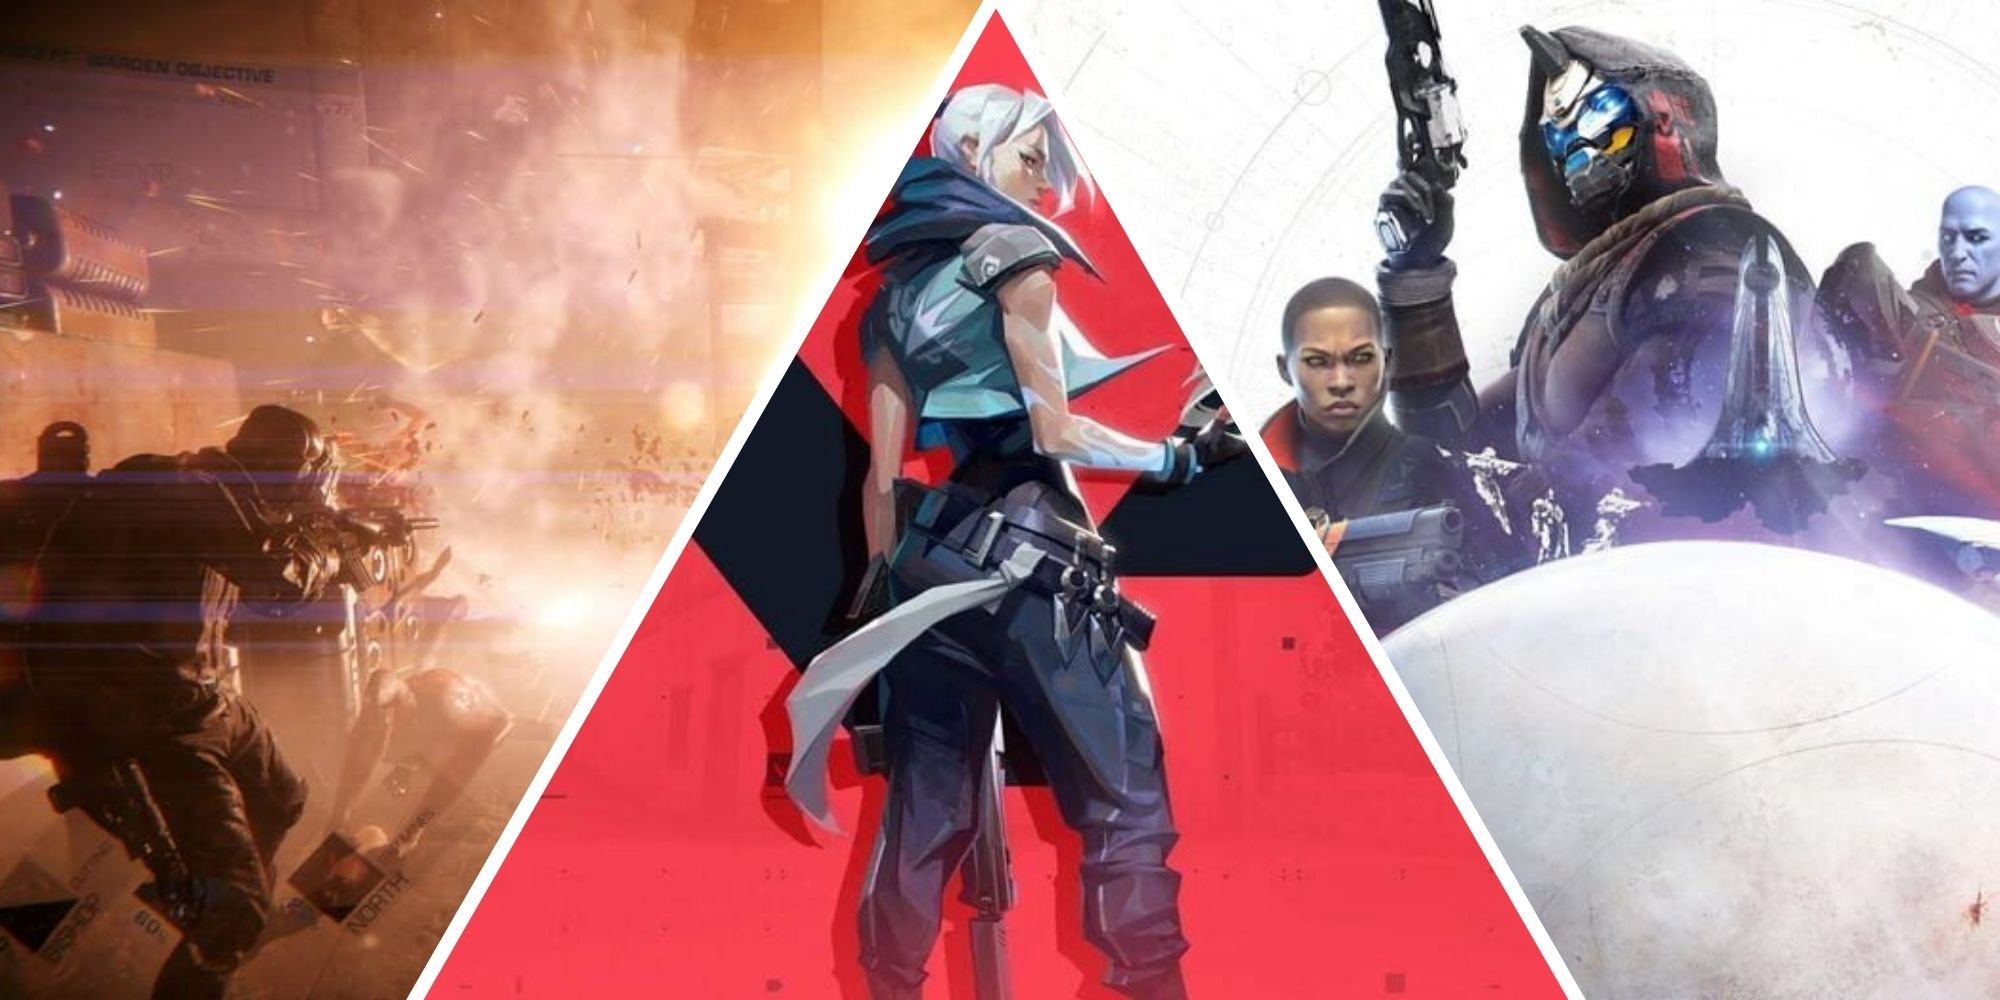 GTFO, Valorant, Destiny 2 key art split image showing various characters in action poses